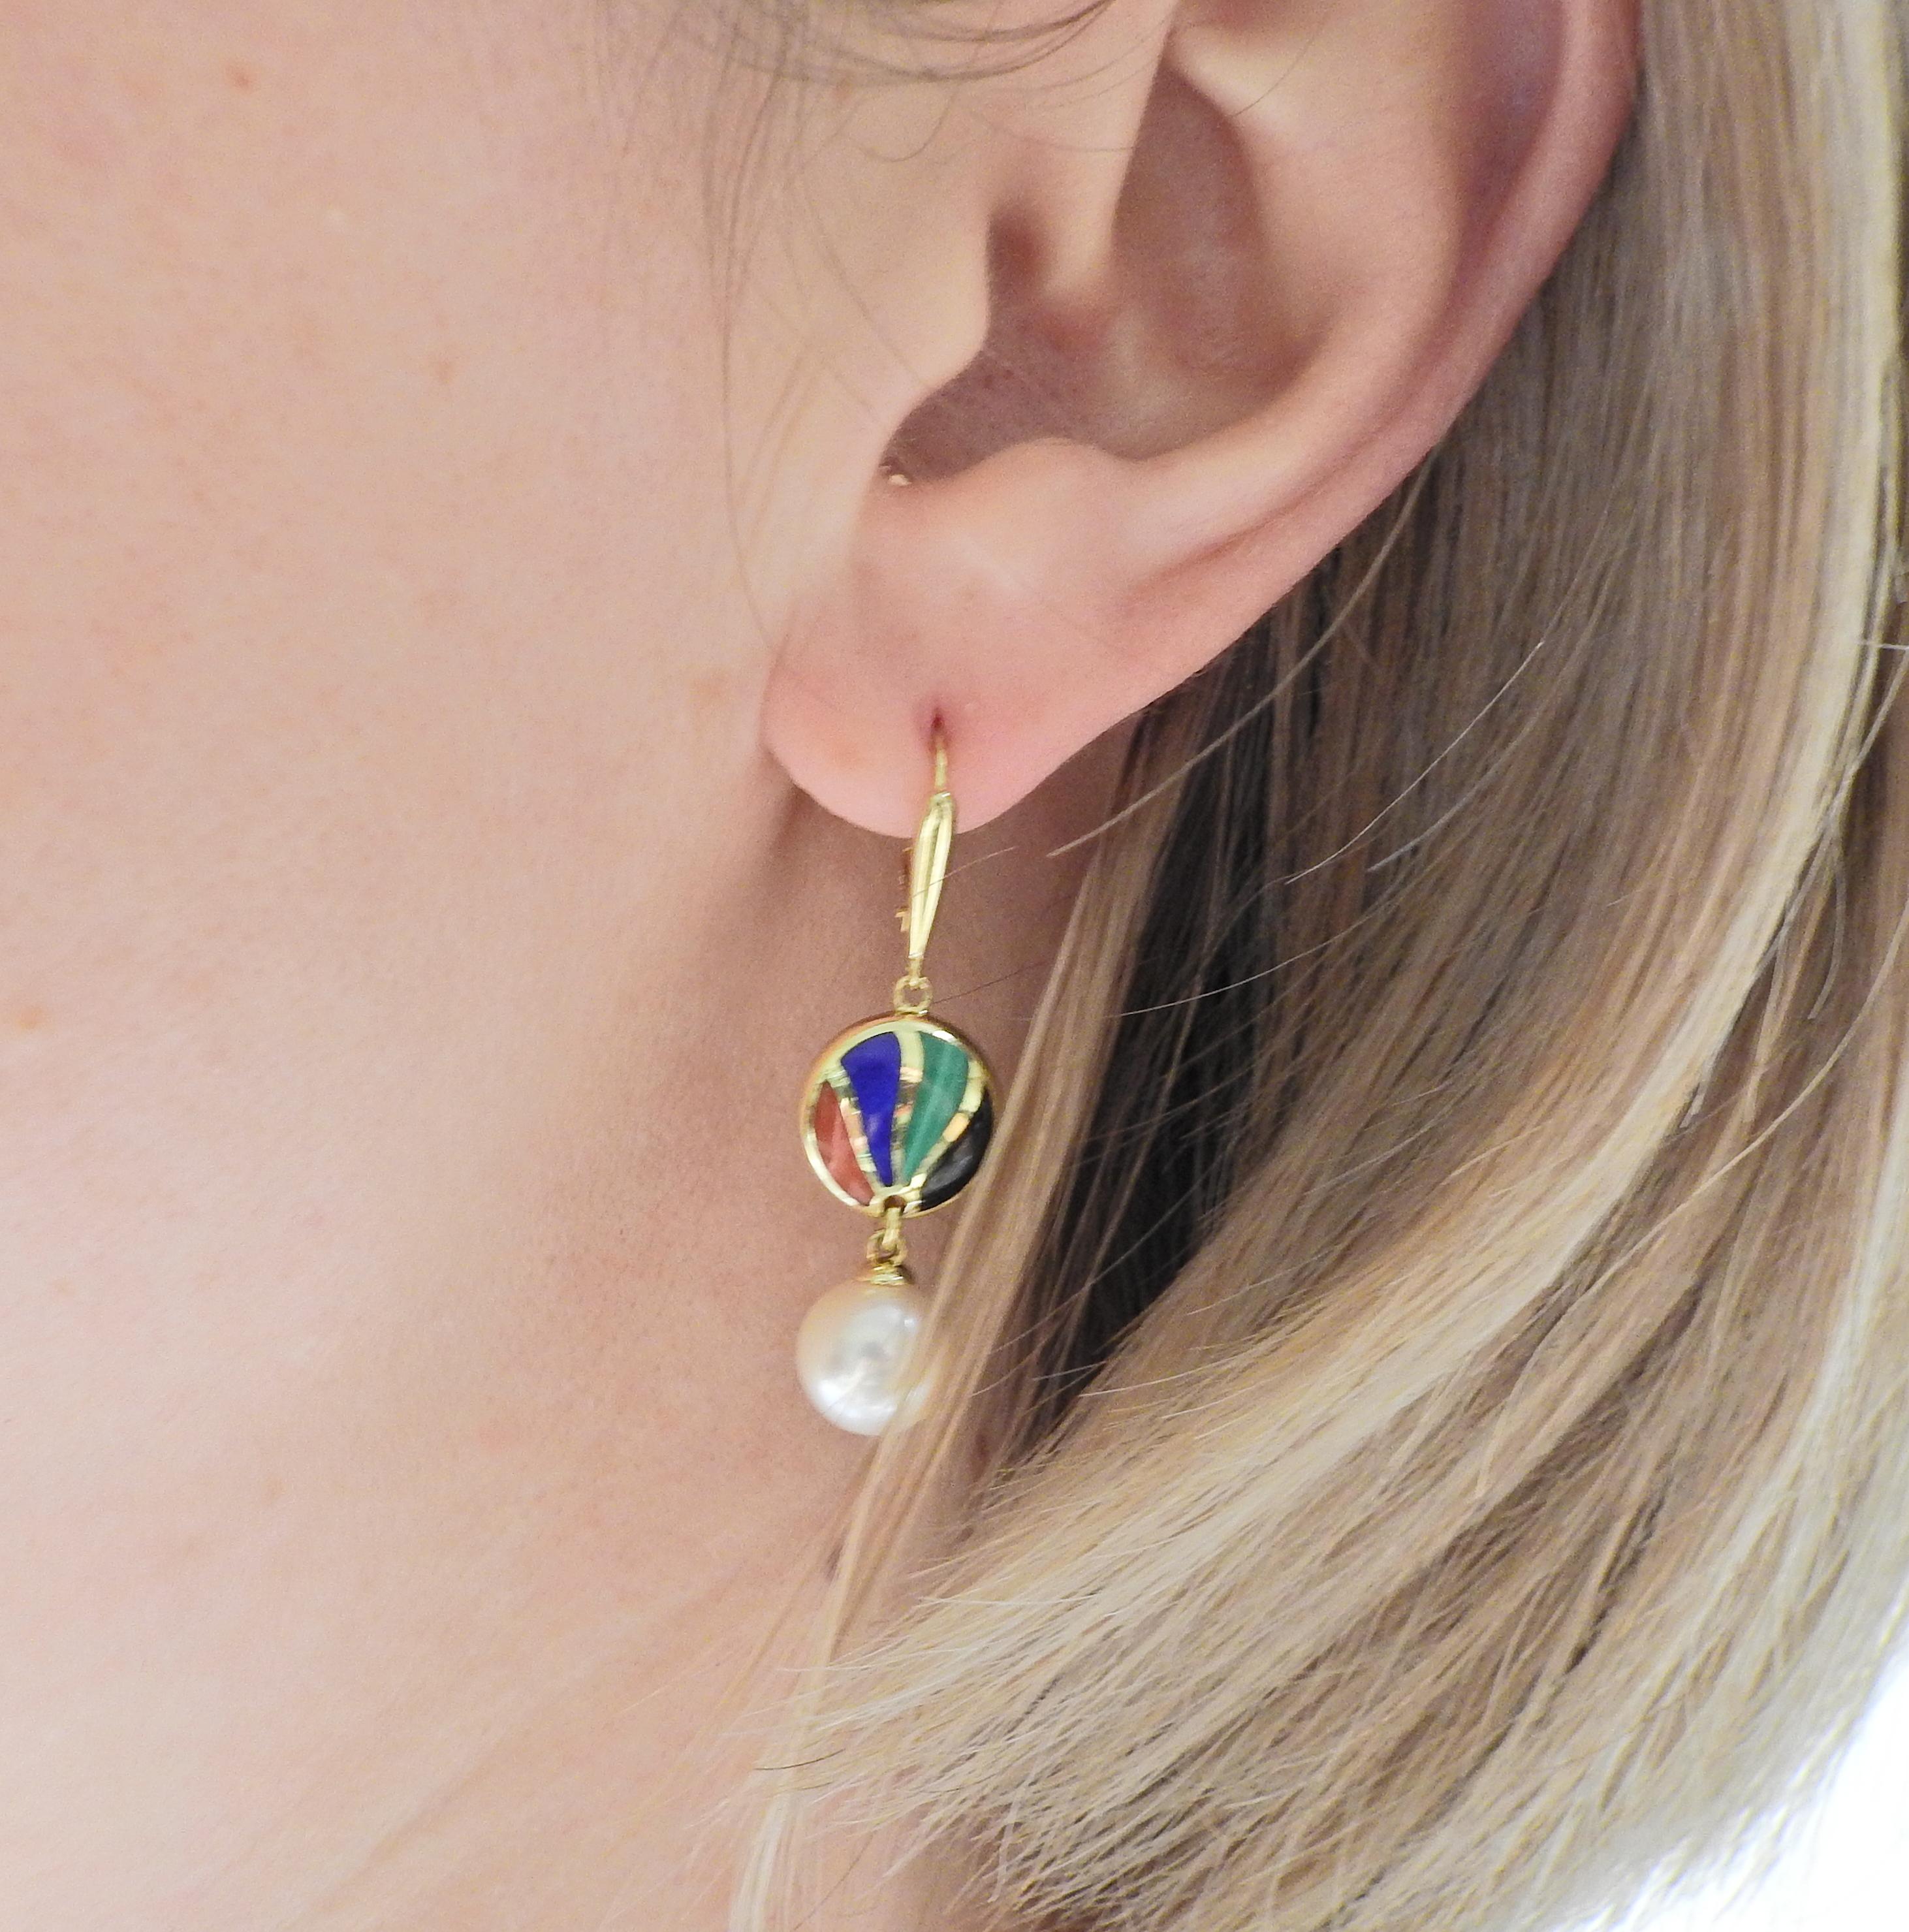 Pair of 14k gold Asch Grossbardt earrings, with 8.7mm pearls, inlay mother of pearl and onyx, lapis and malachite. Earrings are 40mm long. 6.6 grams.